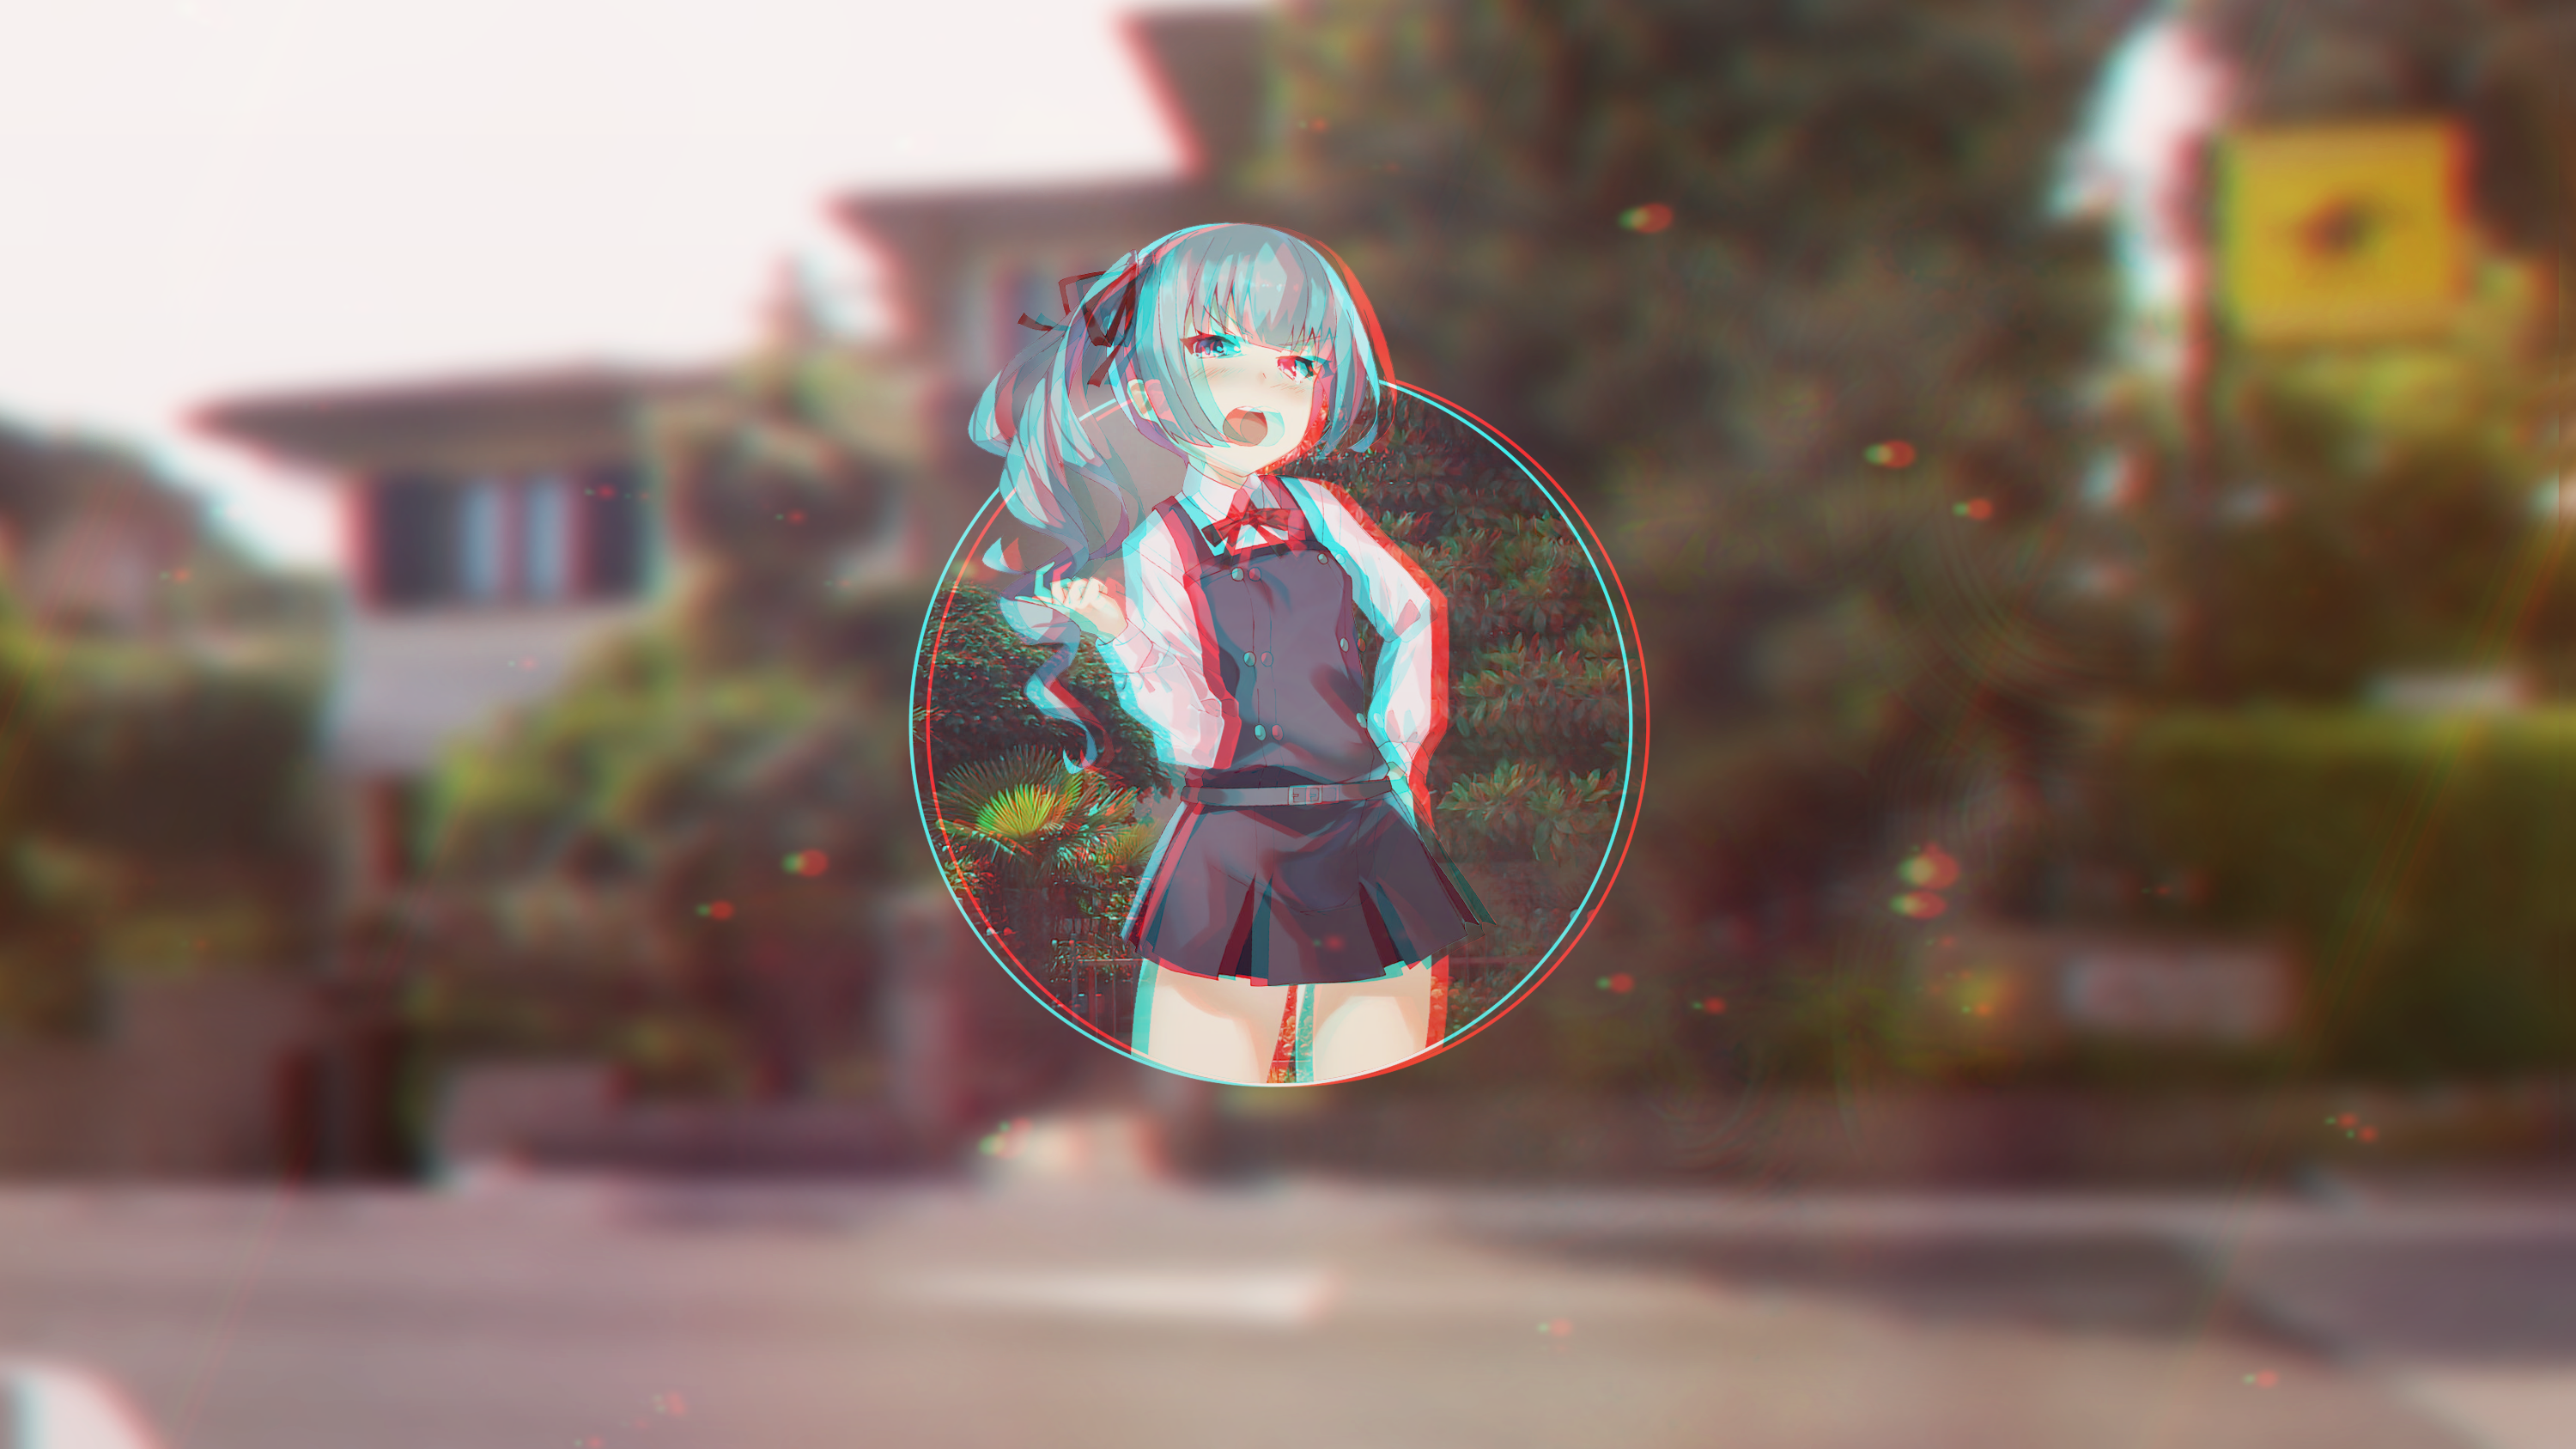 Glitch Art Anime Girls Picture In Picture Piture In Picture 3000x1687